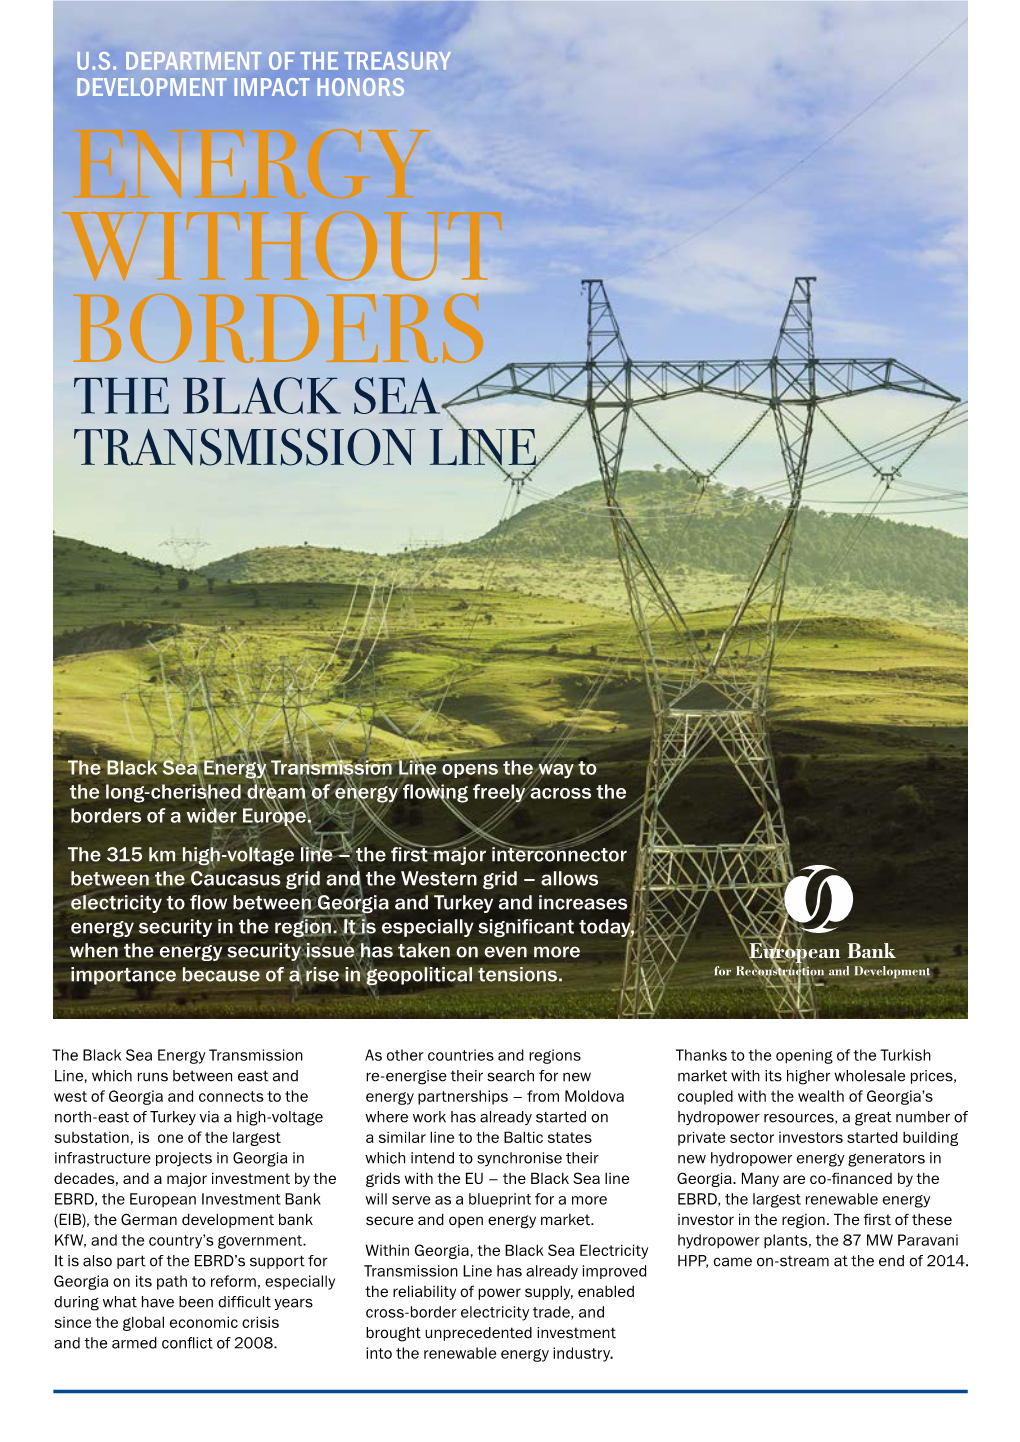 Energy Without Borders the Black Sea Transmission Line